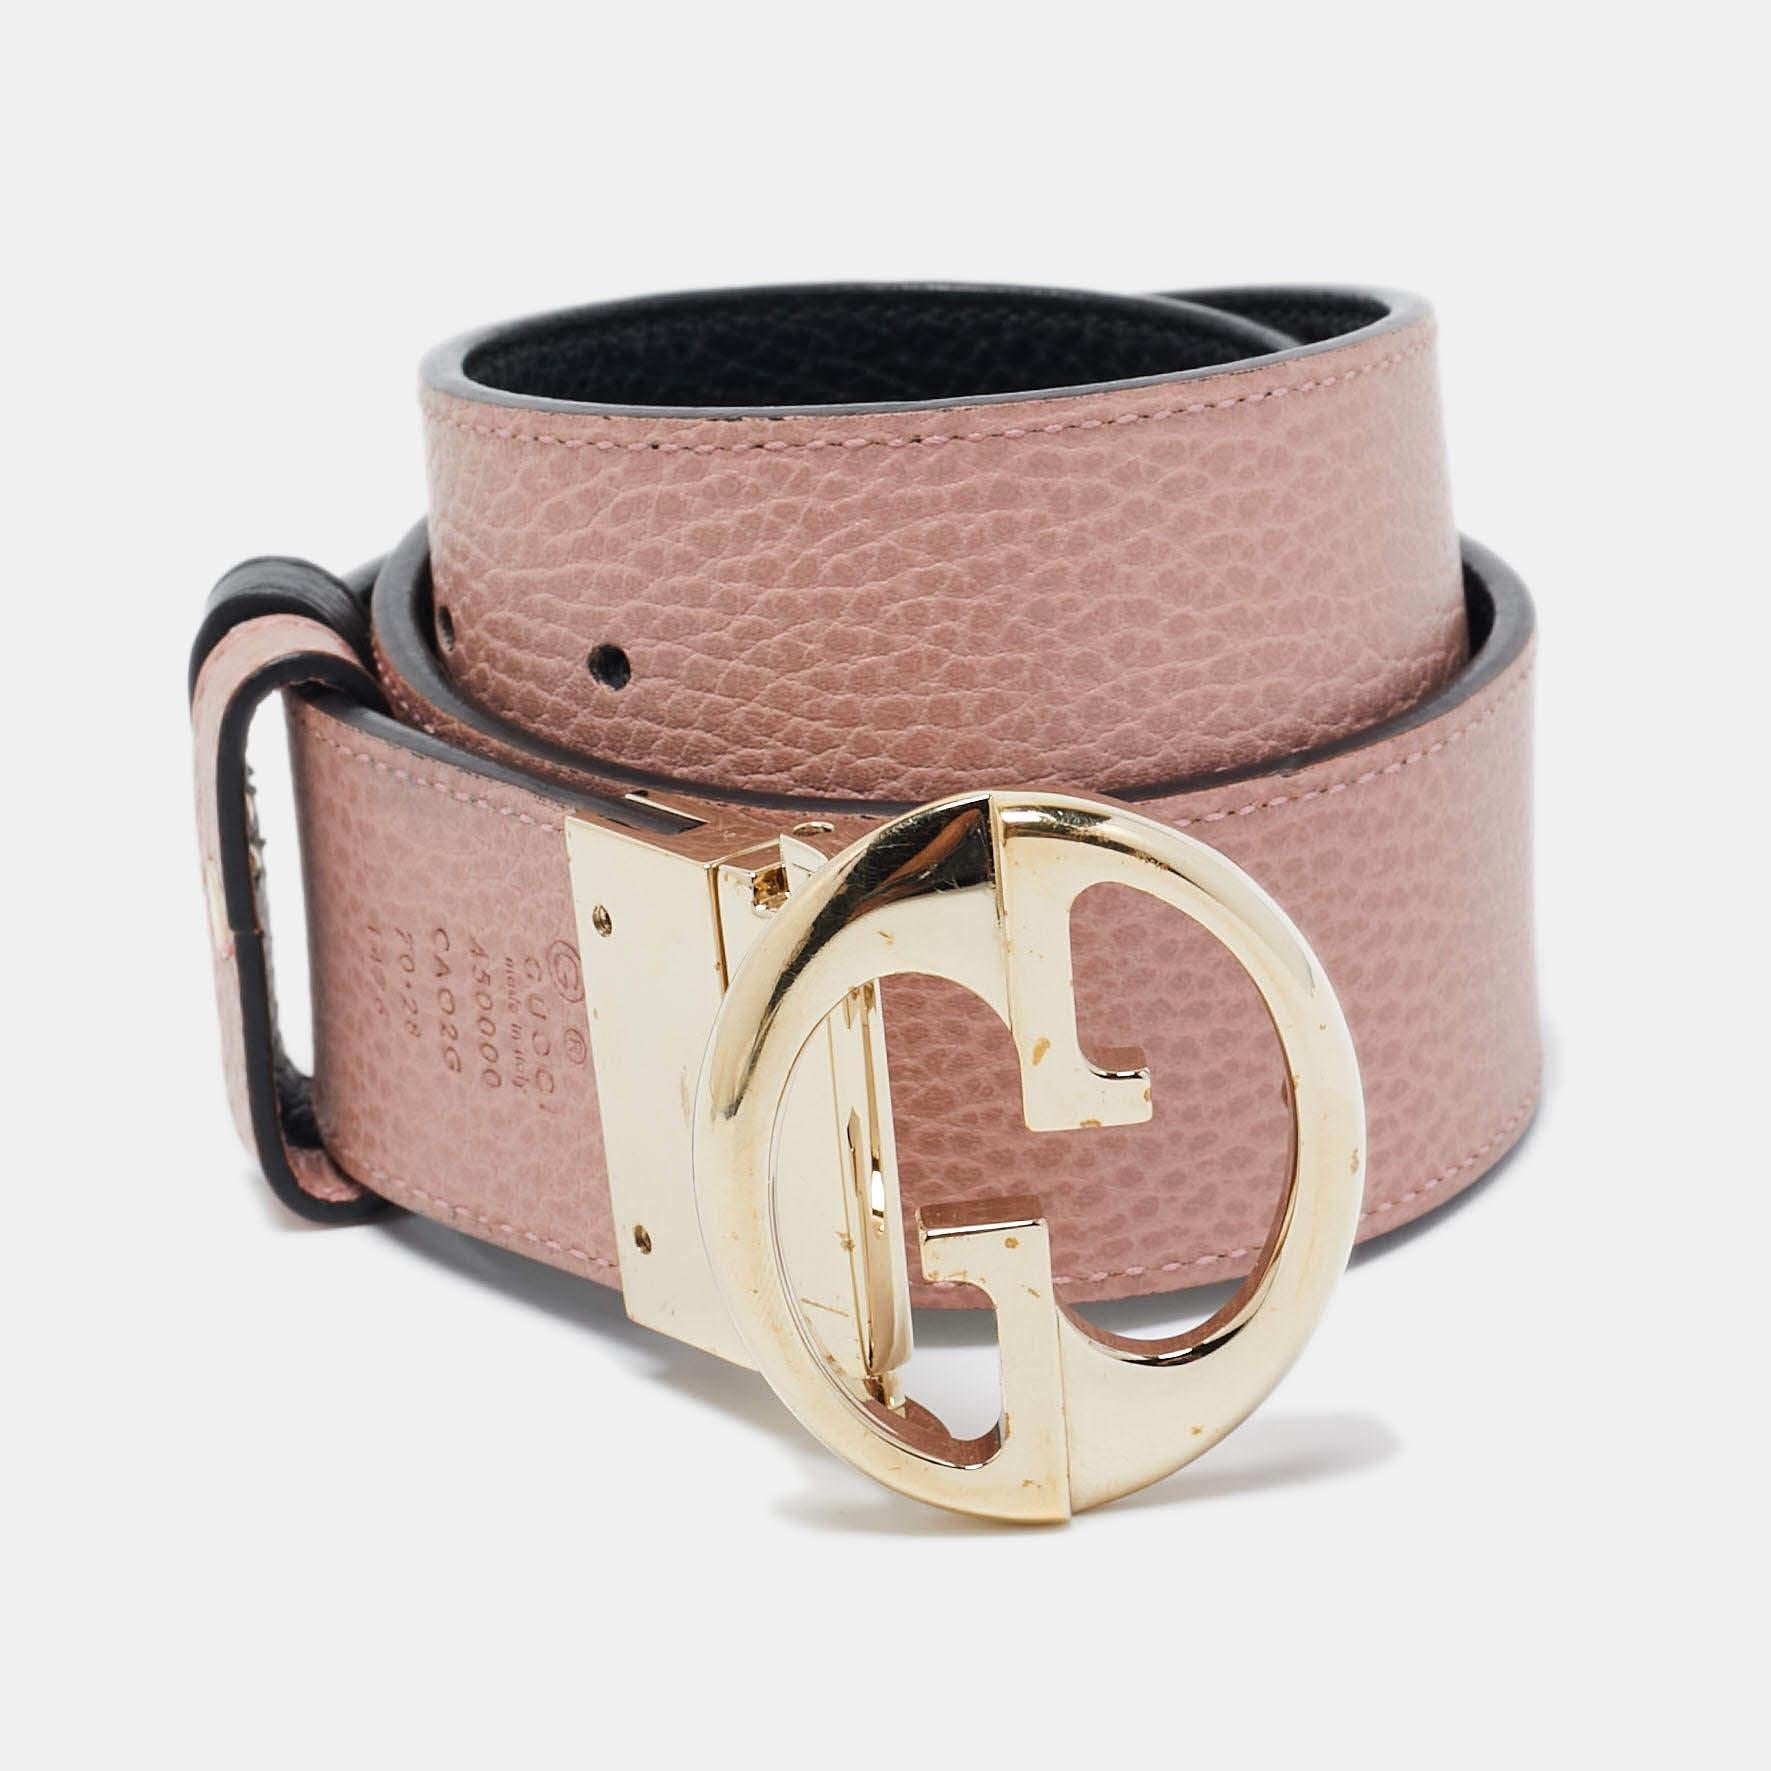 This Gucci belt is crafted from leather. The classic piece has dual shades to match a variety of outfits. It is completed with a gold-tone interlocking G buckle.

Includes
Original Dustbag